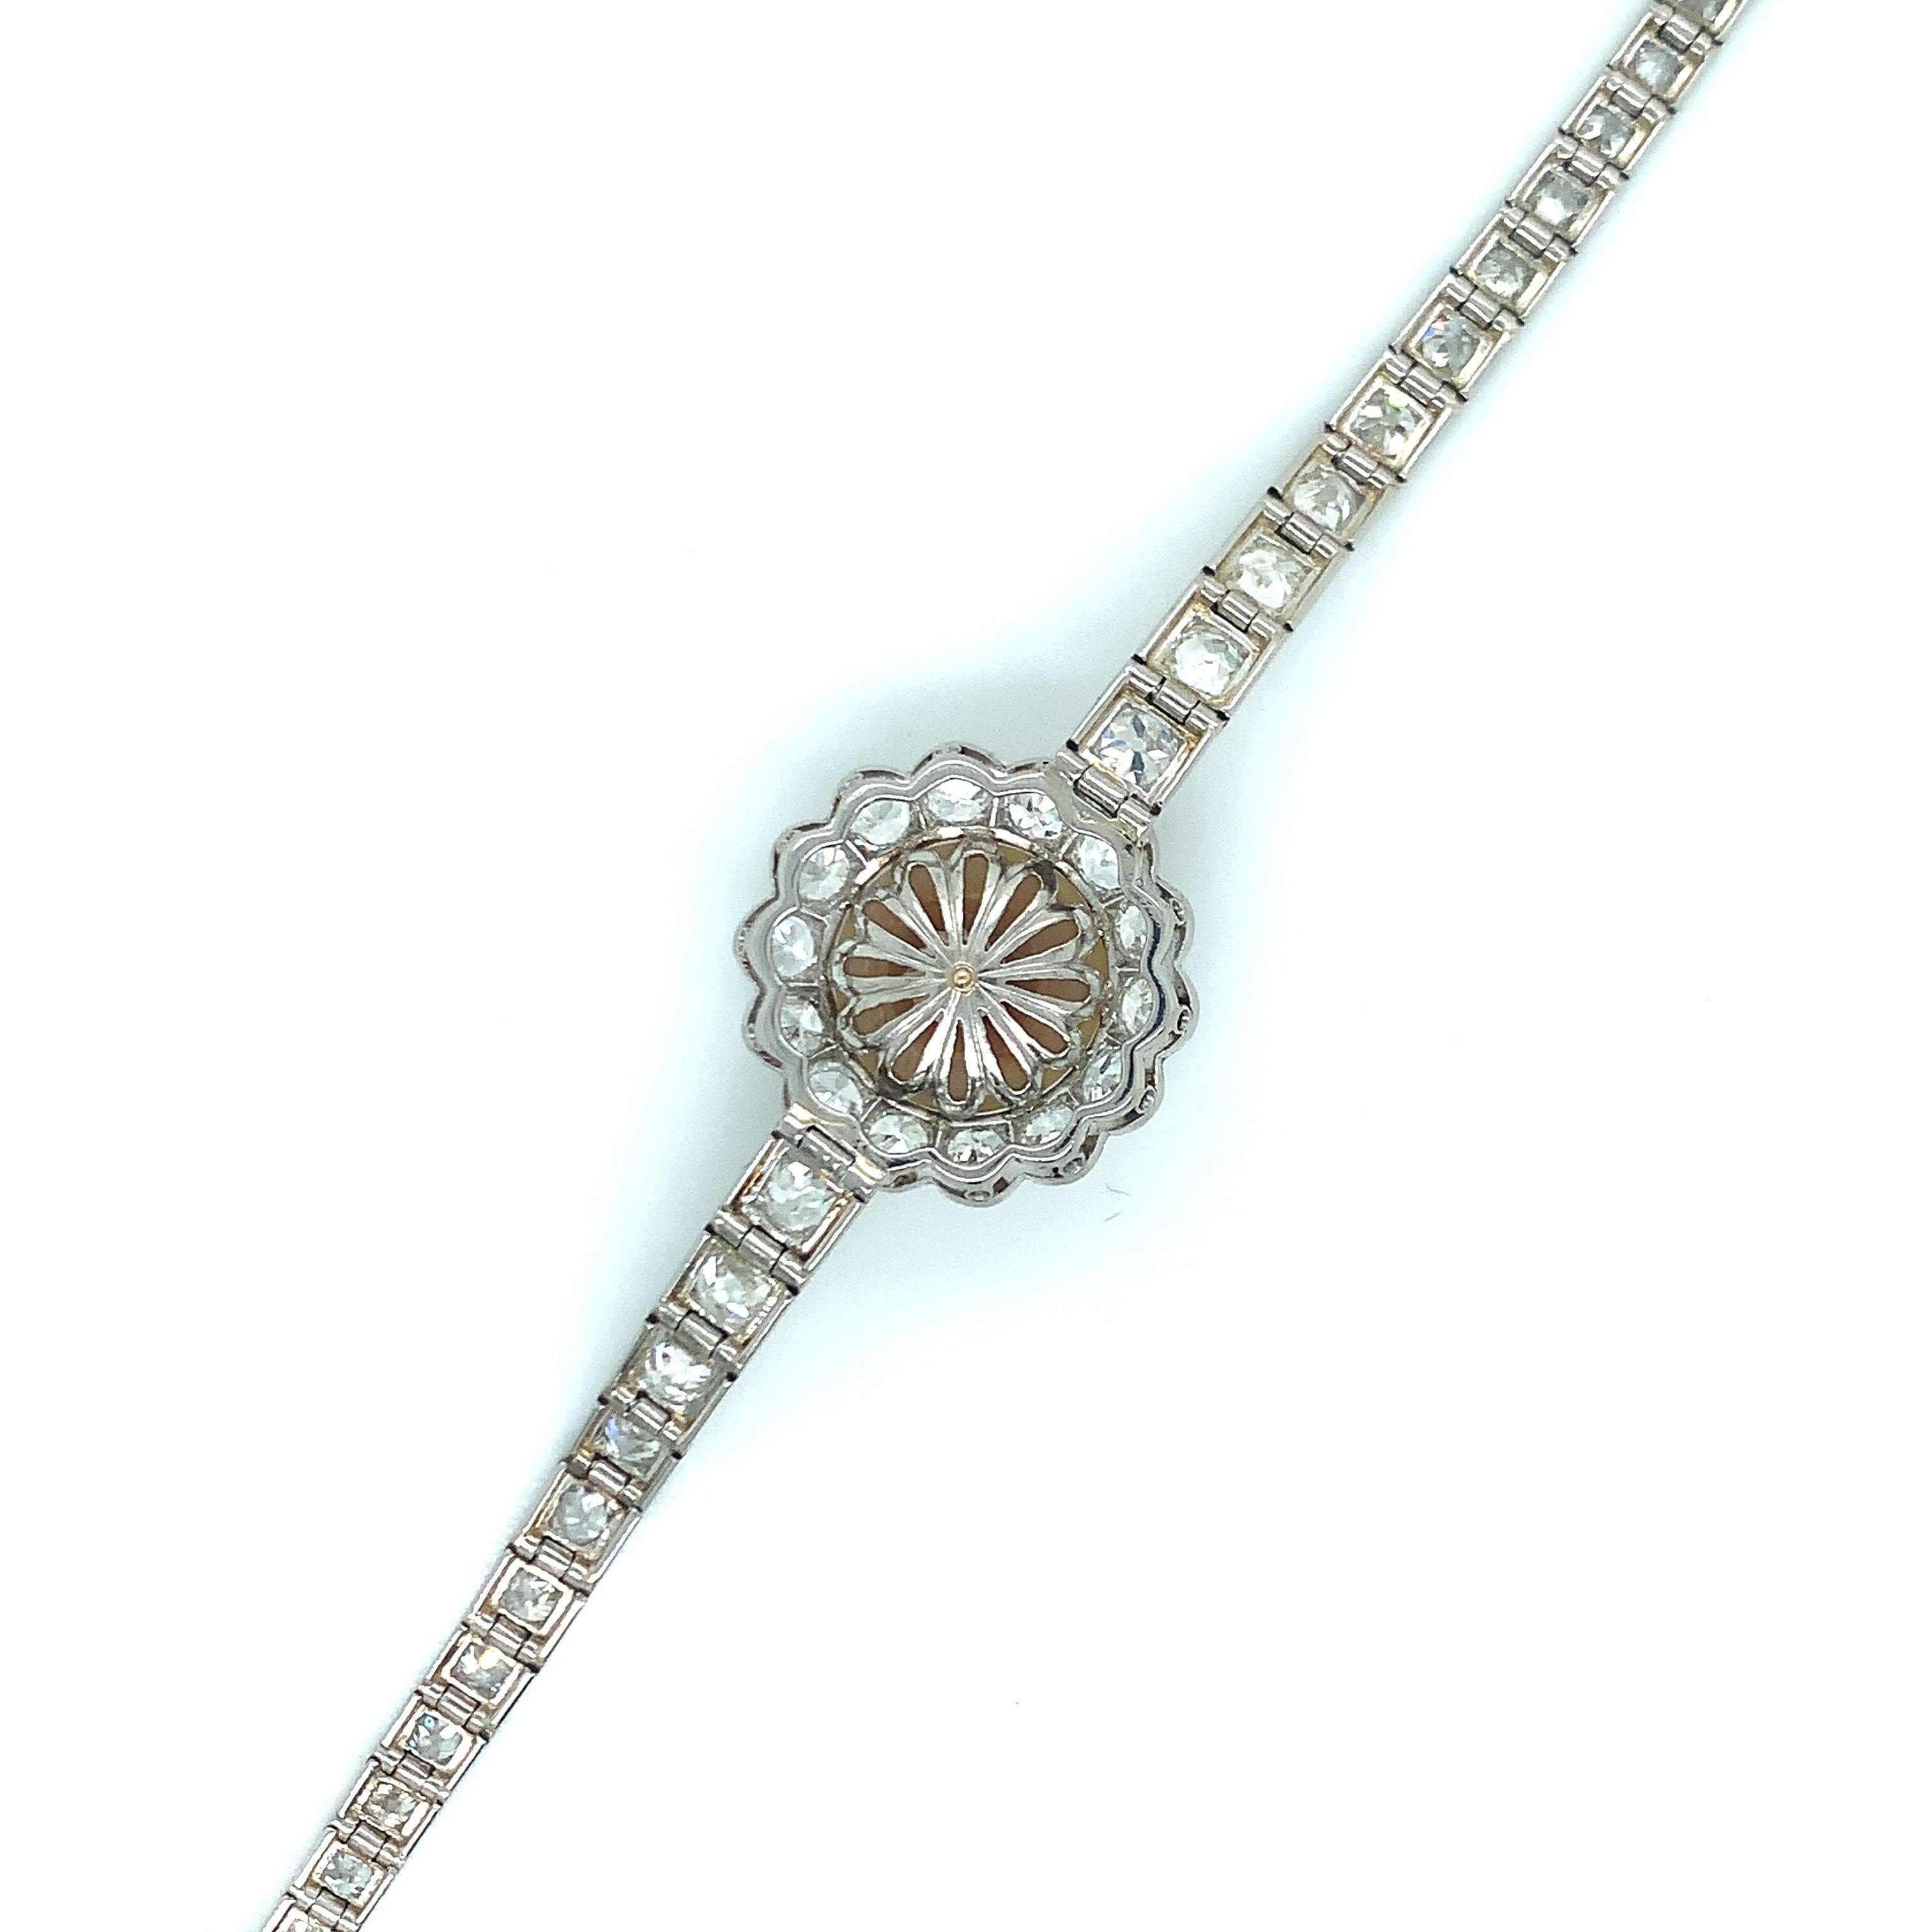 An art deco design, this bracelet has a pearl at its center with diamonds present throughout. Set in platinum, the diamonds weigh approximately 6.5-7 carats. Inner circumference: 7 inches. Total weight: 22.6 grams. 